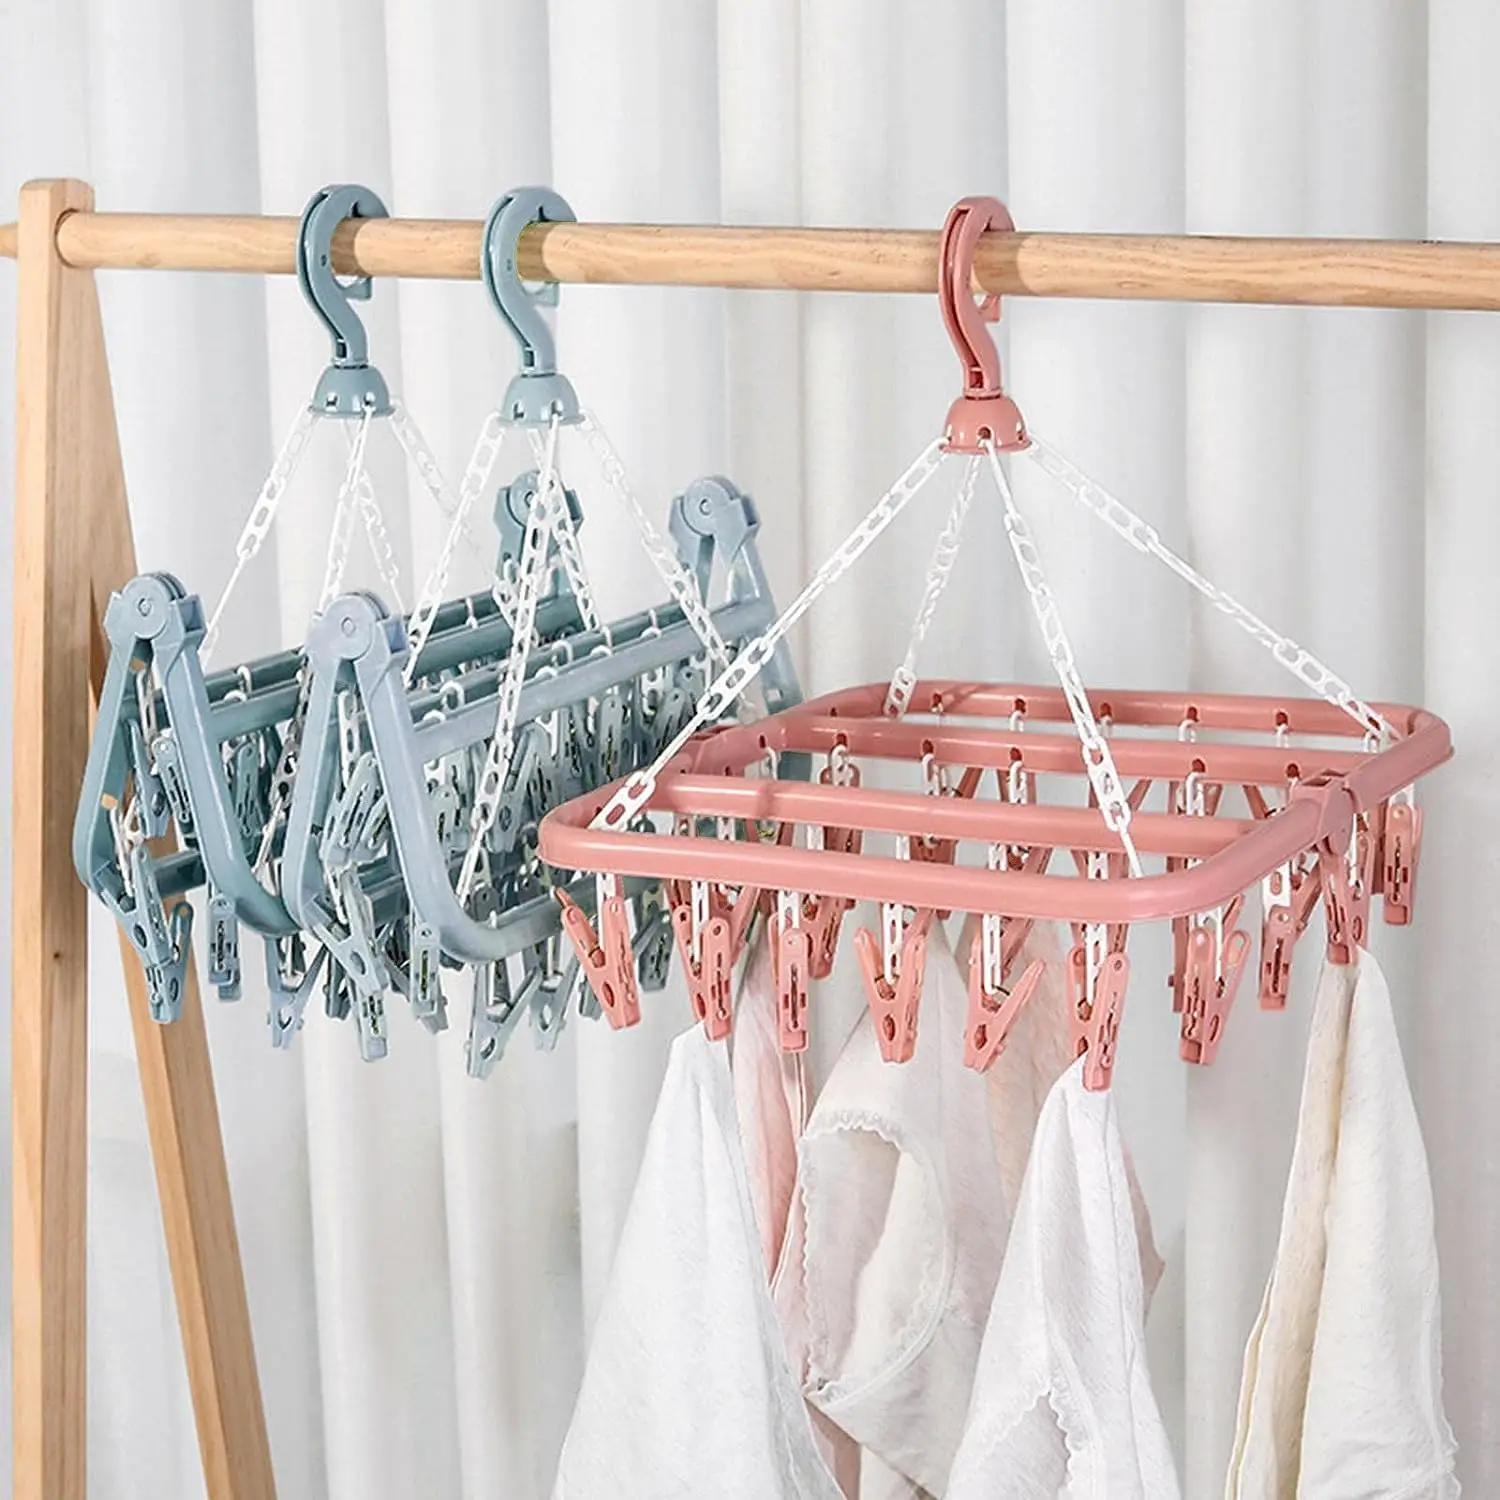 Household Items Plastic Foldable Clothes Socks Underwear Drying Hanger Storage Holders Racks with 32 Clips and Drip Vulcanus